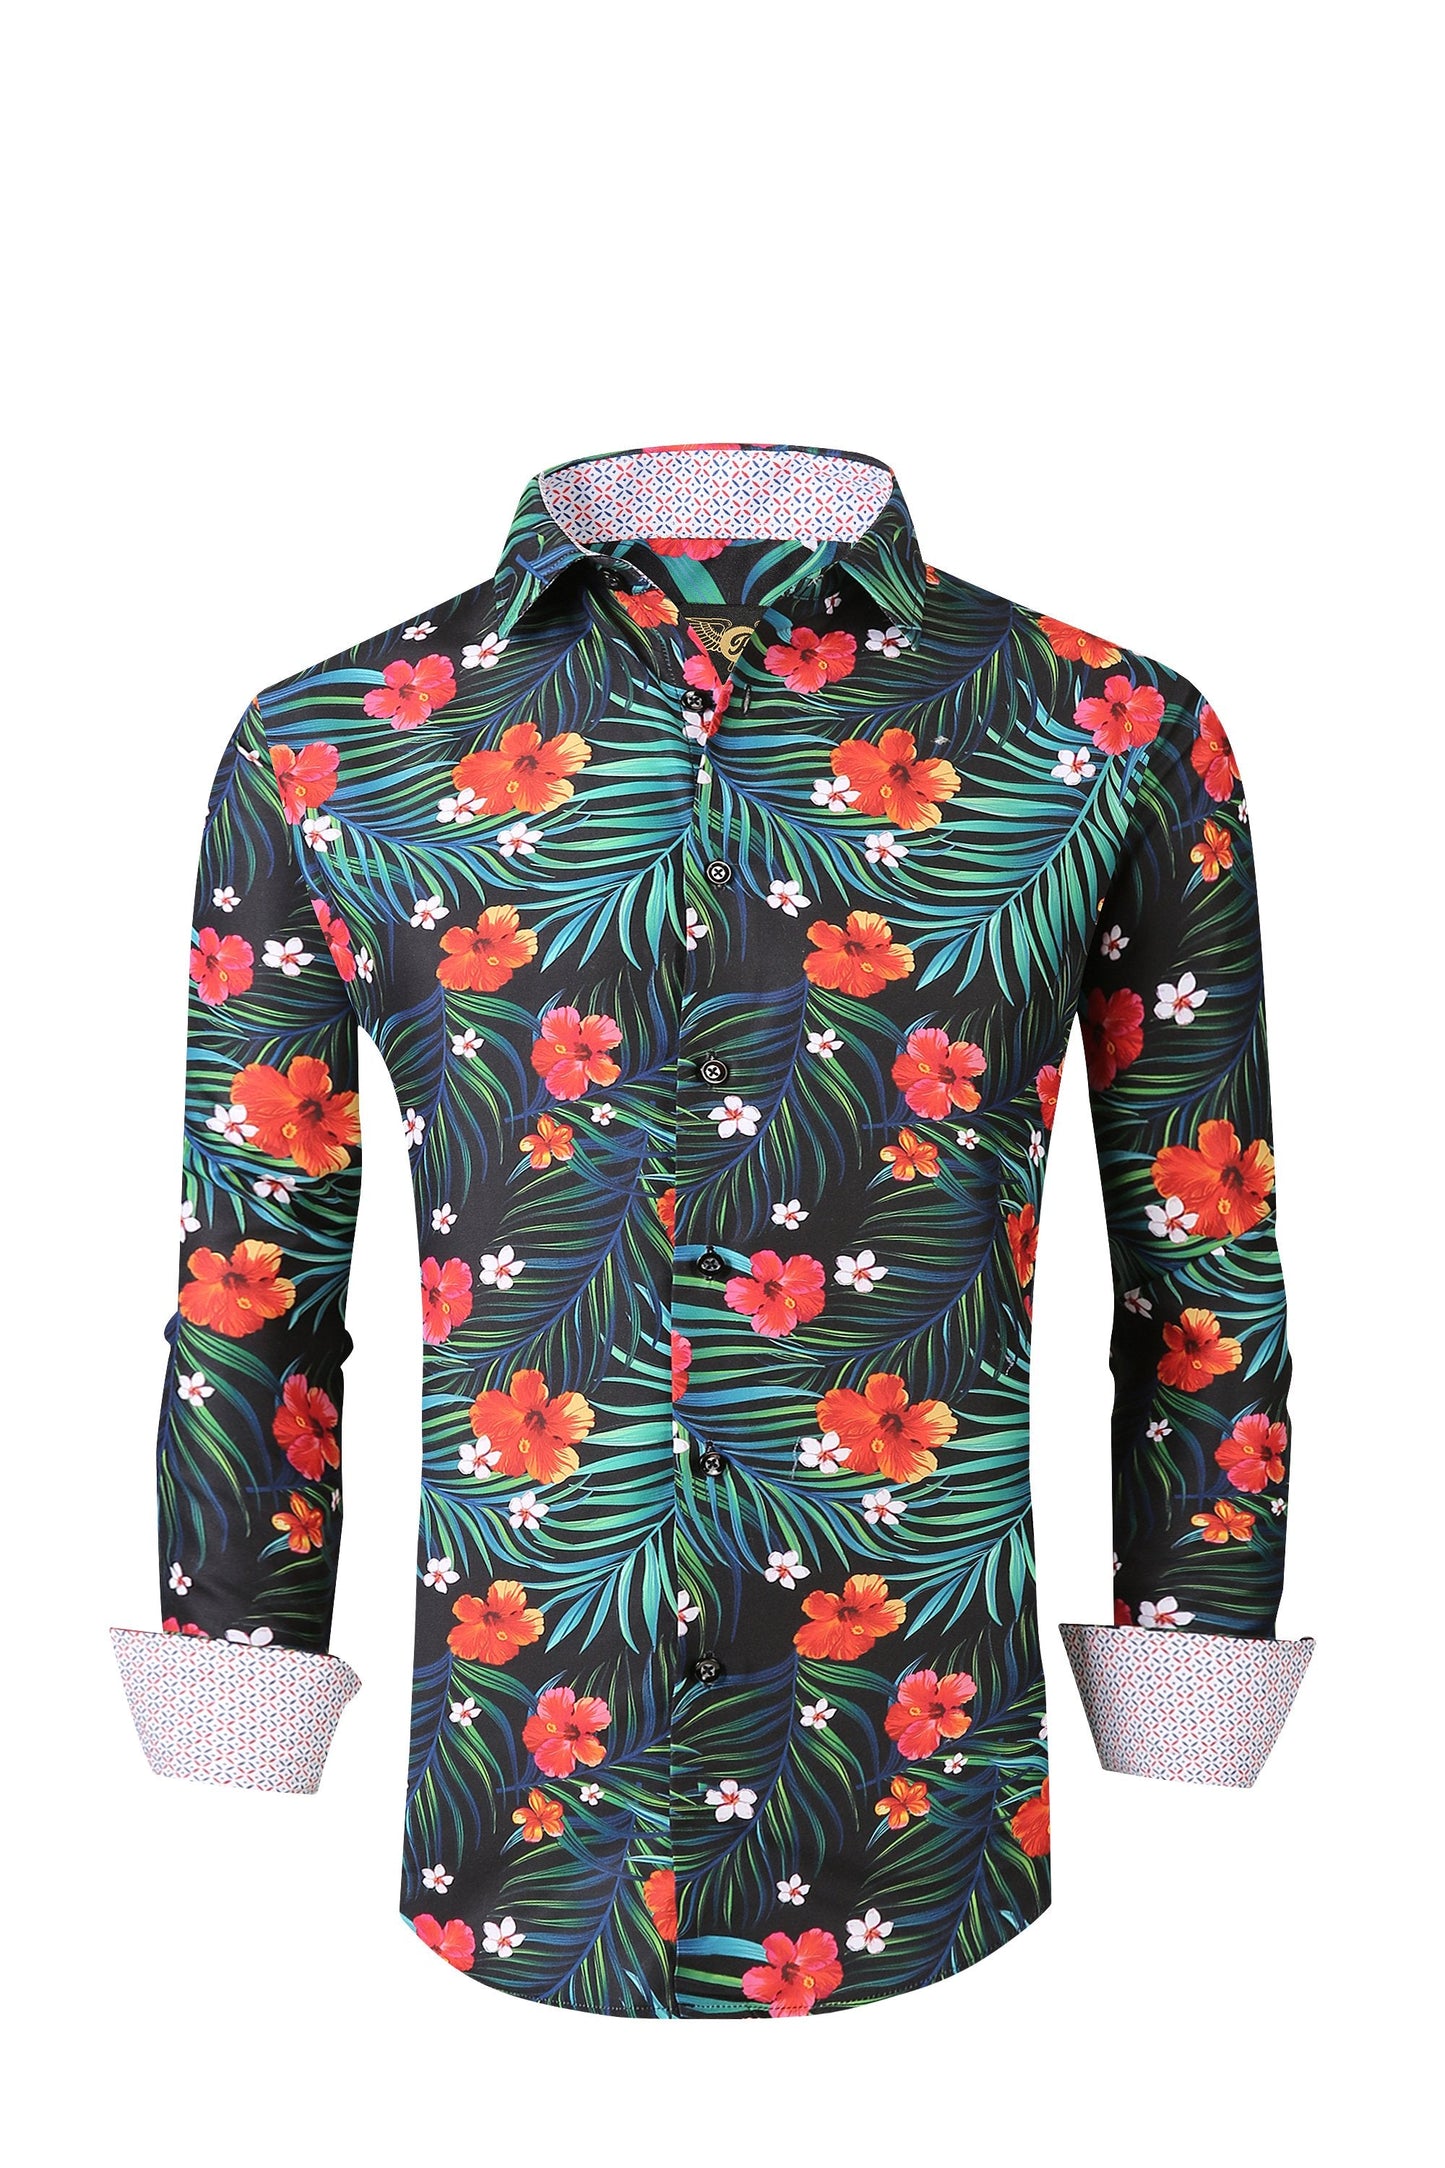 Mens PREMIERE Long Sleeve Button Down Dress Shirt GREEN RED HIBISCUS FLORAL